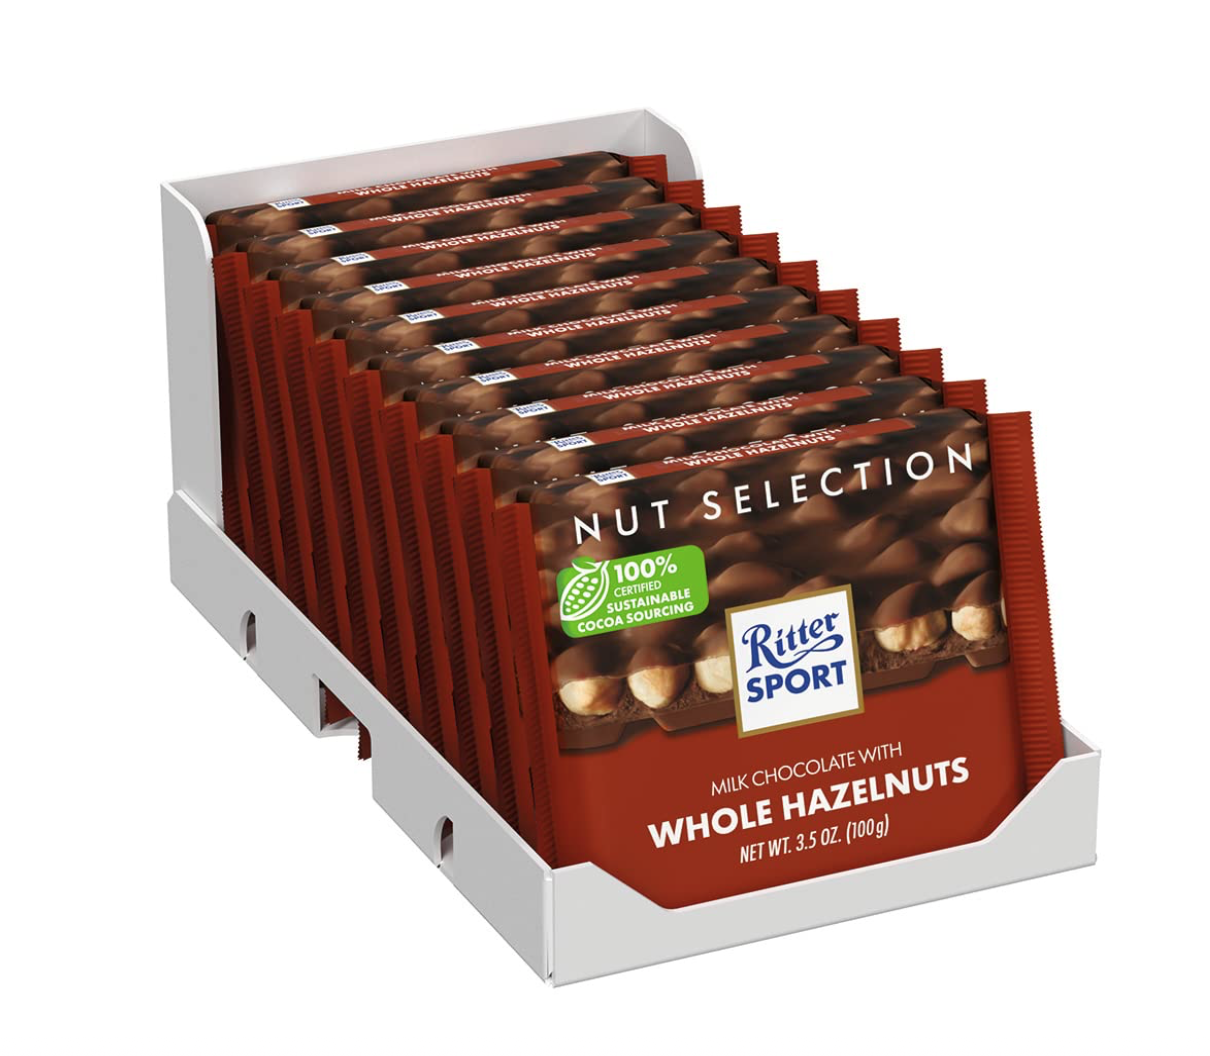 Ritter Sport Milk Chocolate with Whole Hazelnuts 100g | IN STORE ONLY